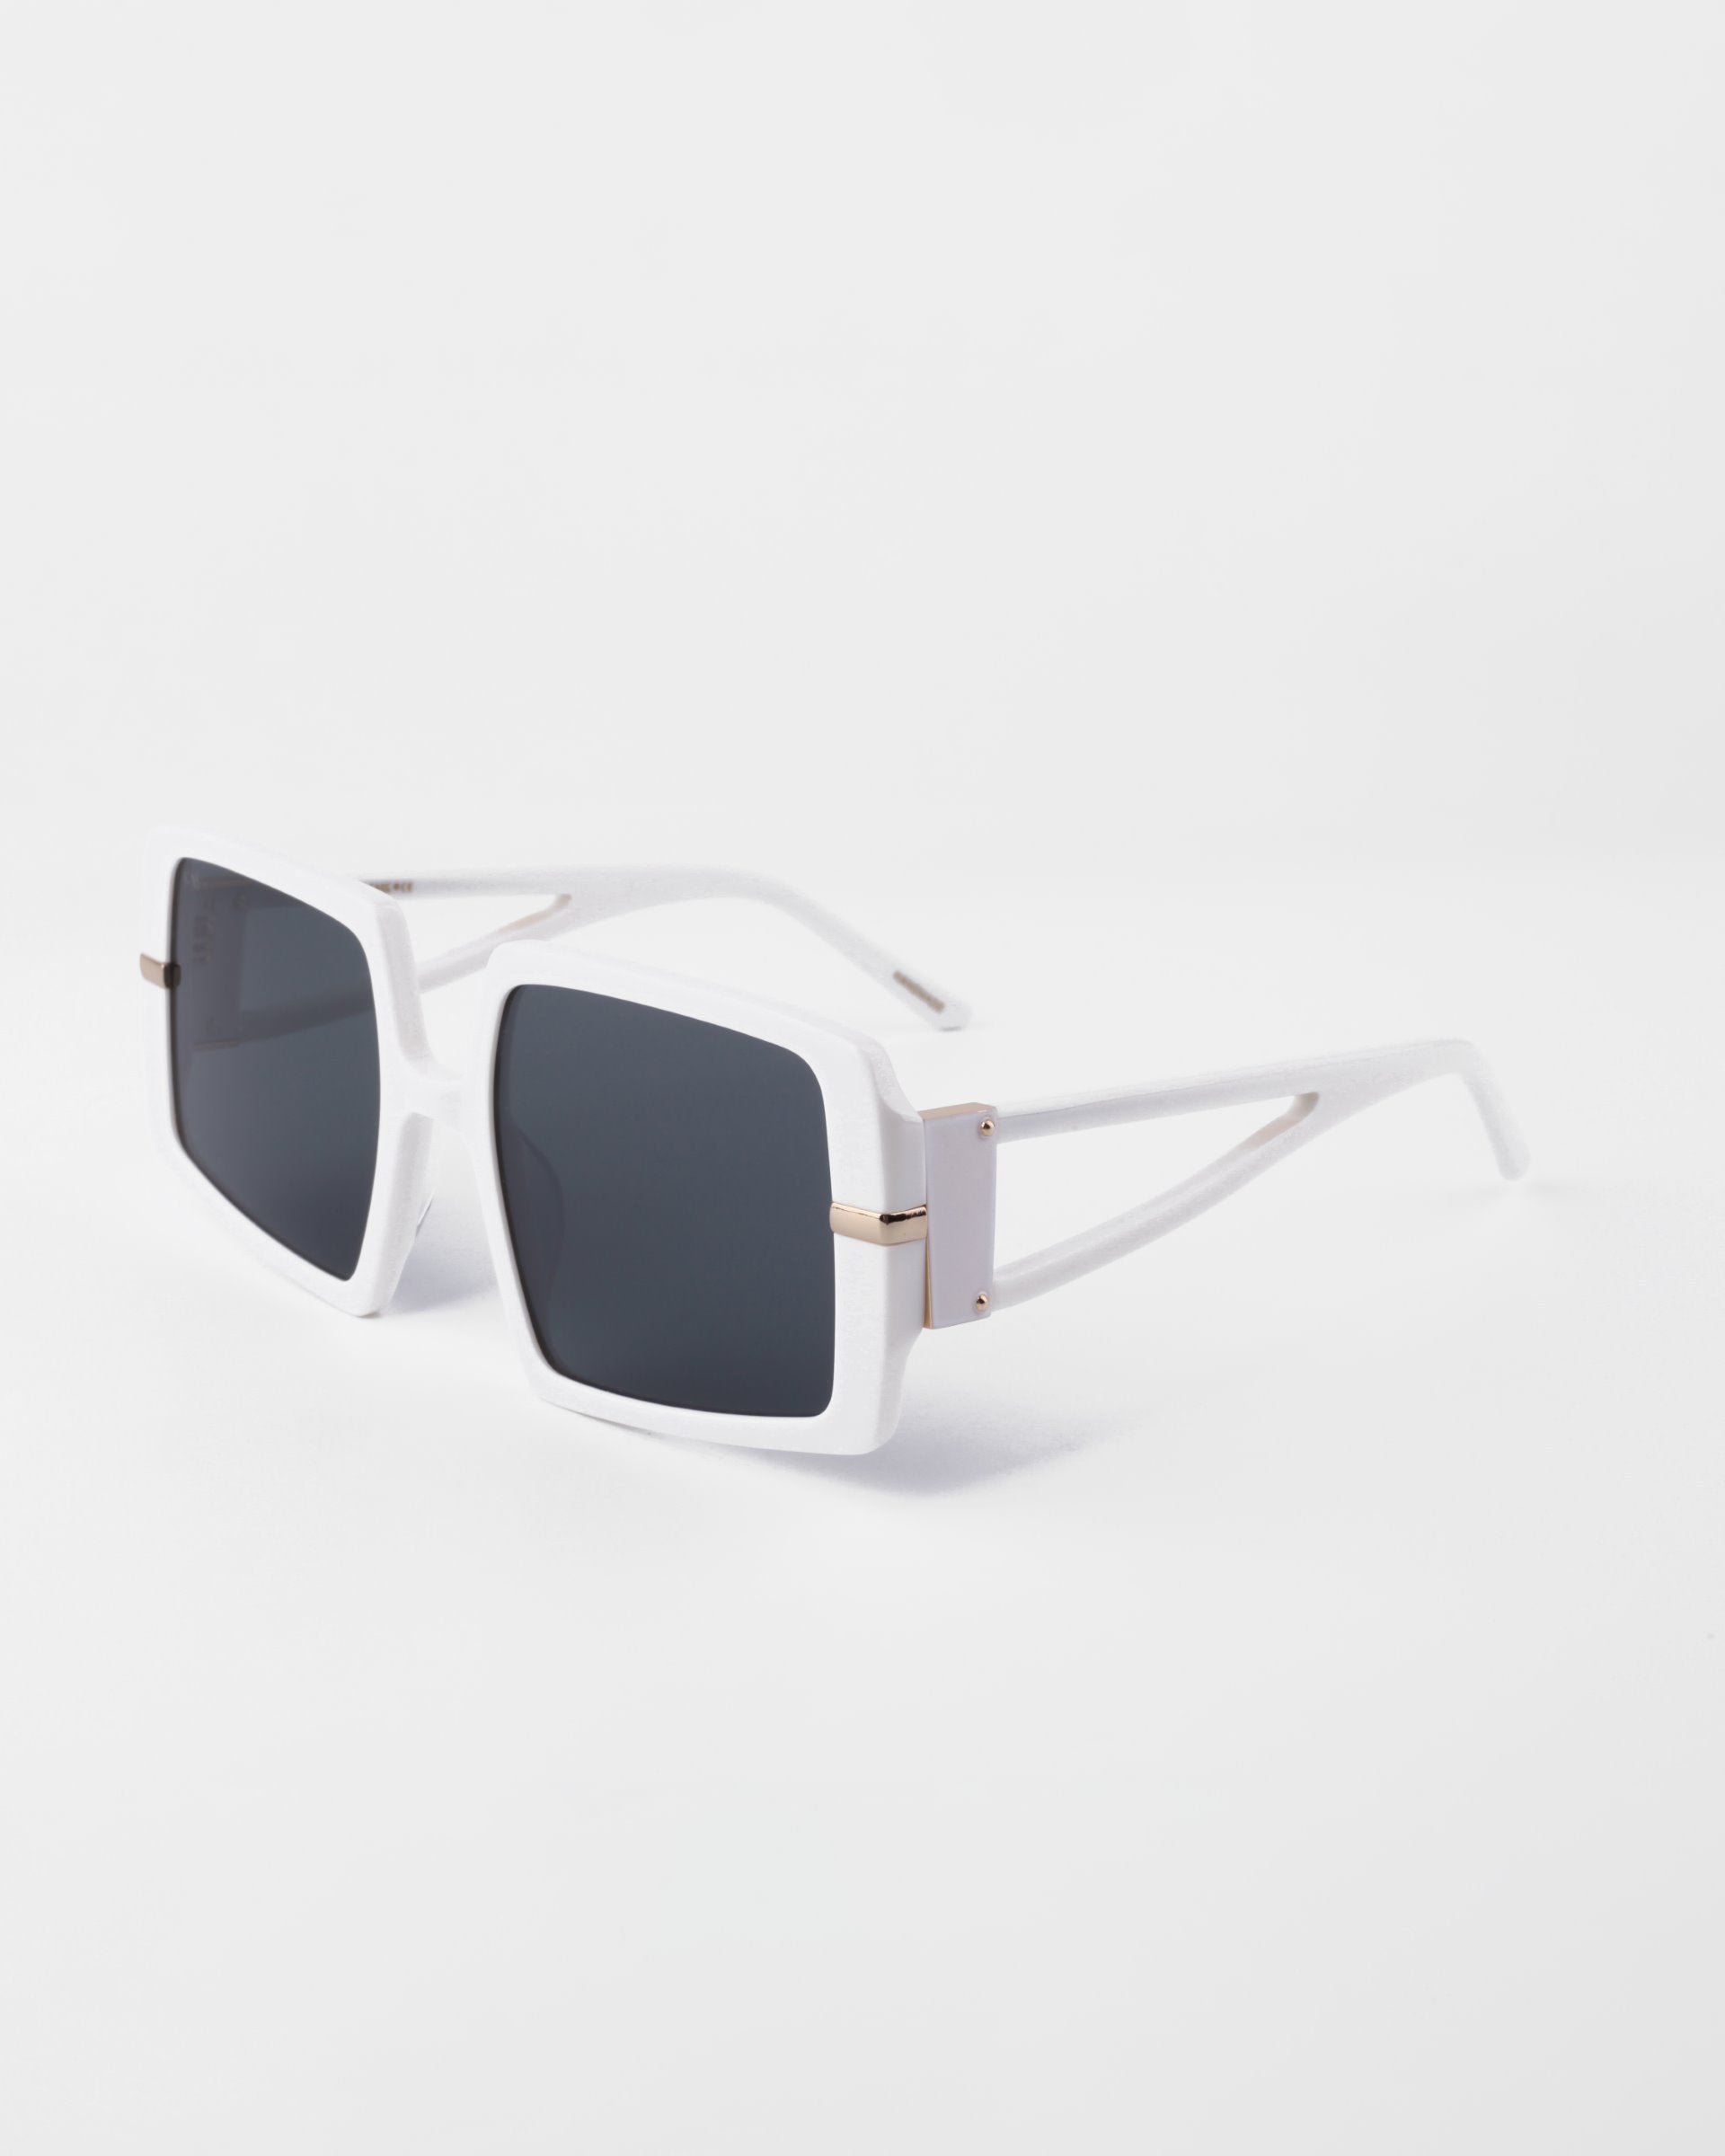 A pair of modern white-framed sunglasses with large, square, shatter-resistant nylon lenses. The white temples feature a cutout design near the hinges. Crafted from plant-based acetate, they offer both style and sustainability. These are the Saturday by For Art&#39;s Sake®. The background is a smooth, neutral white.